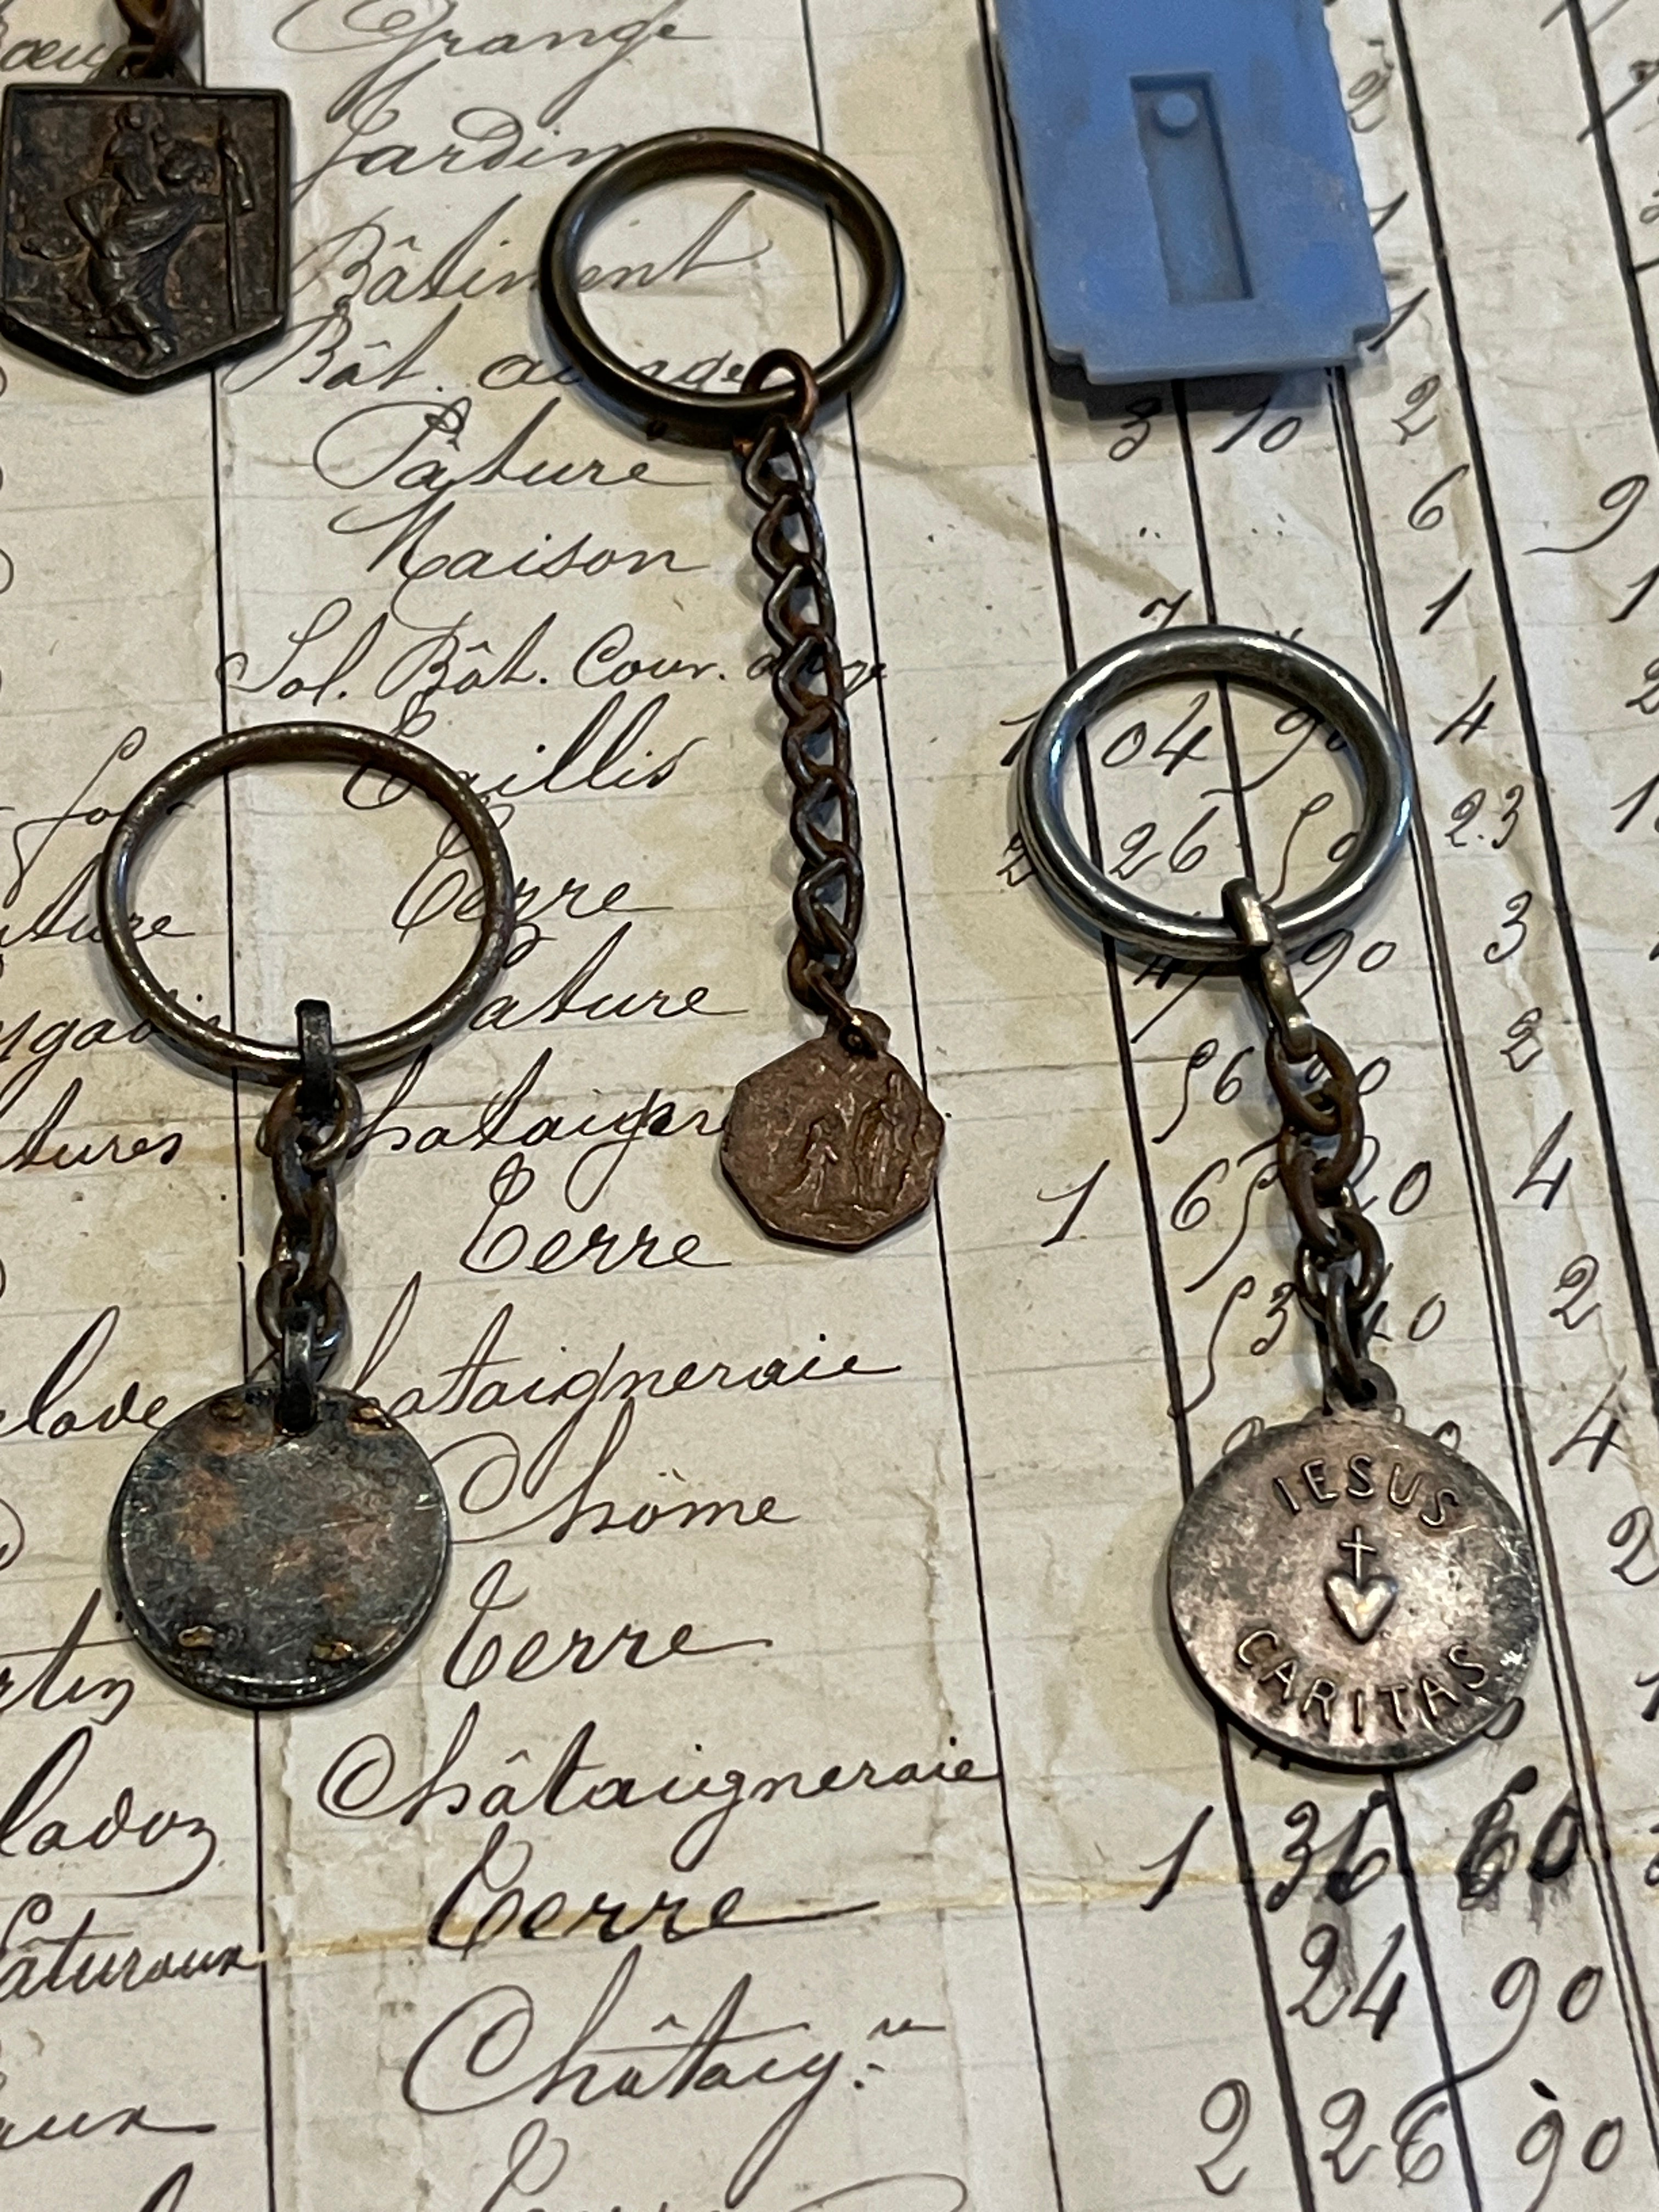 Antique French Medals - Key Chains?